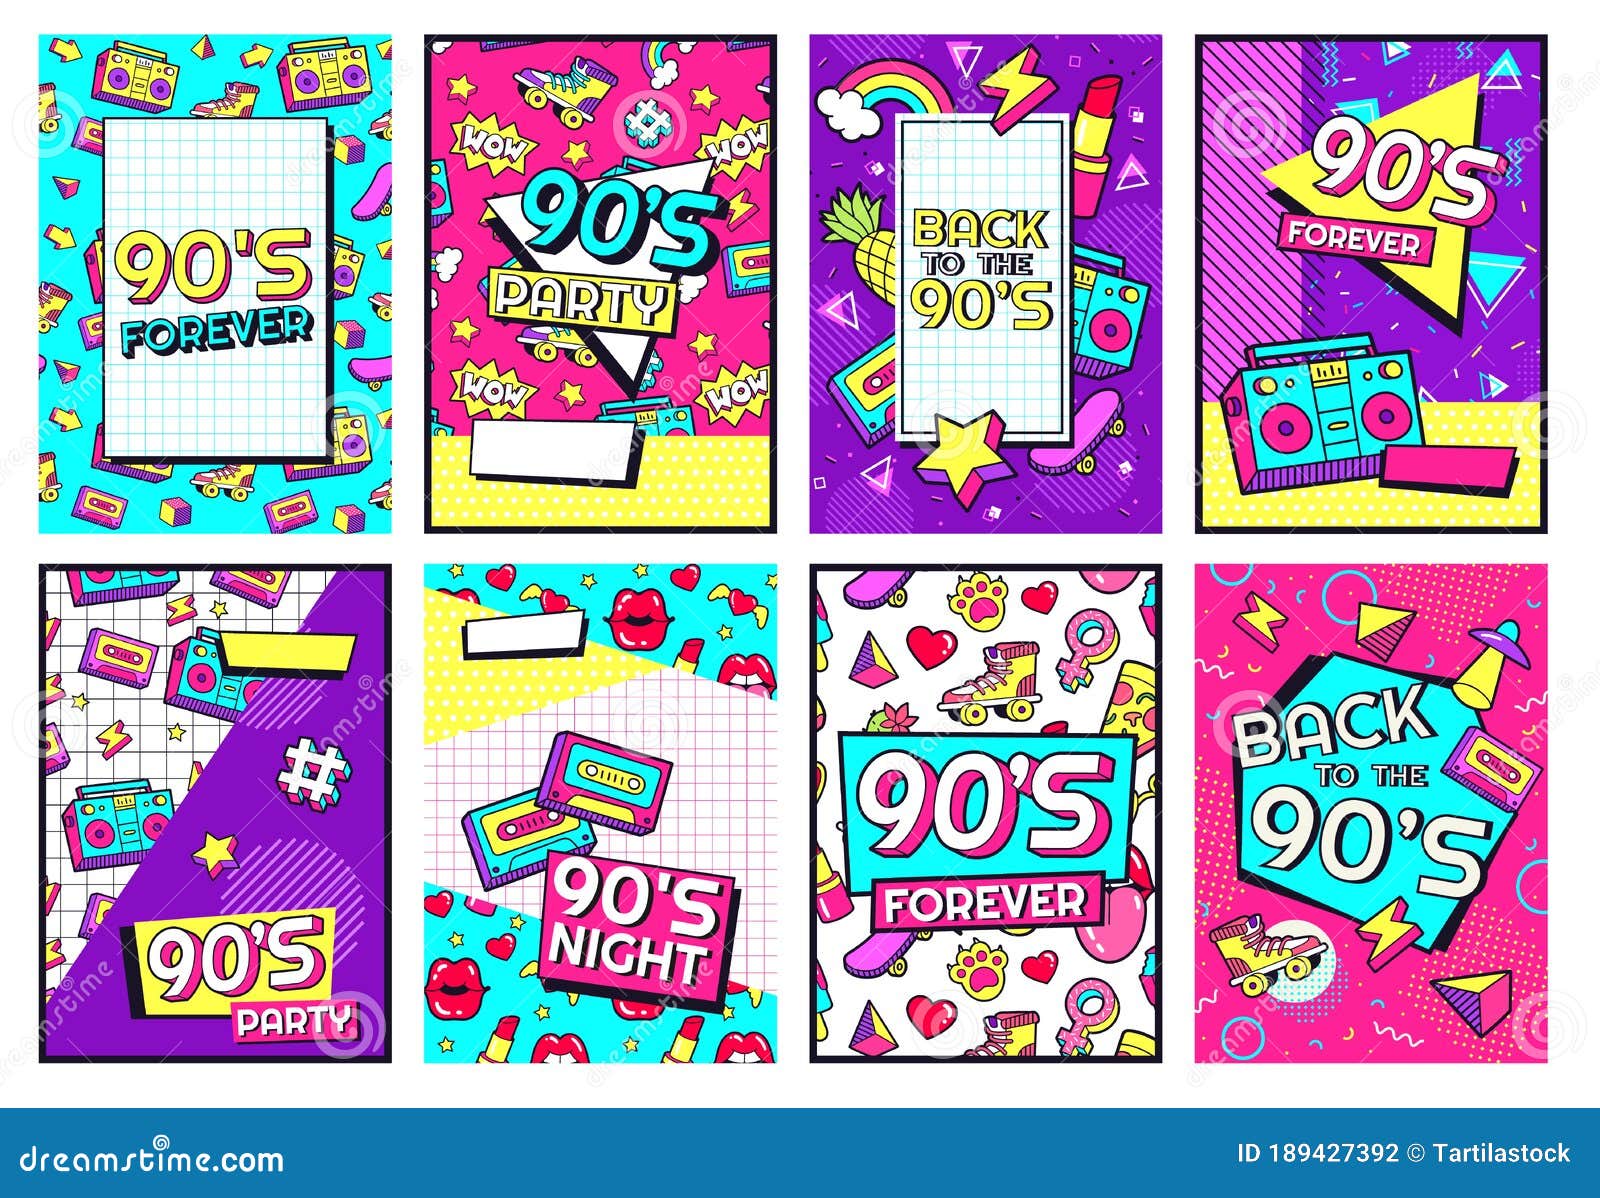 retro 90s poster. nineties forever, funky 1990s music night party posters and pop flyer card  set